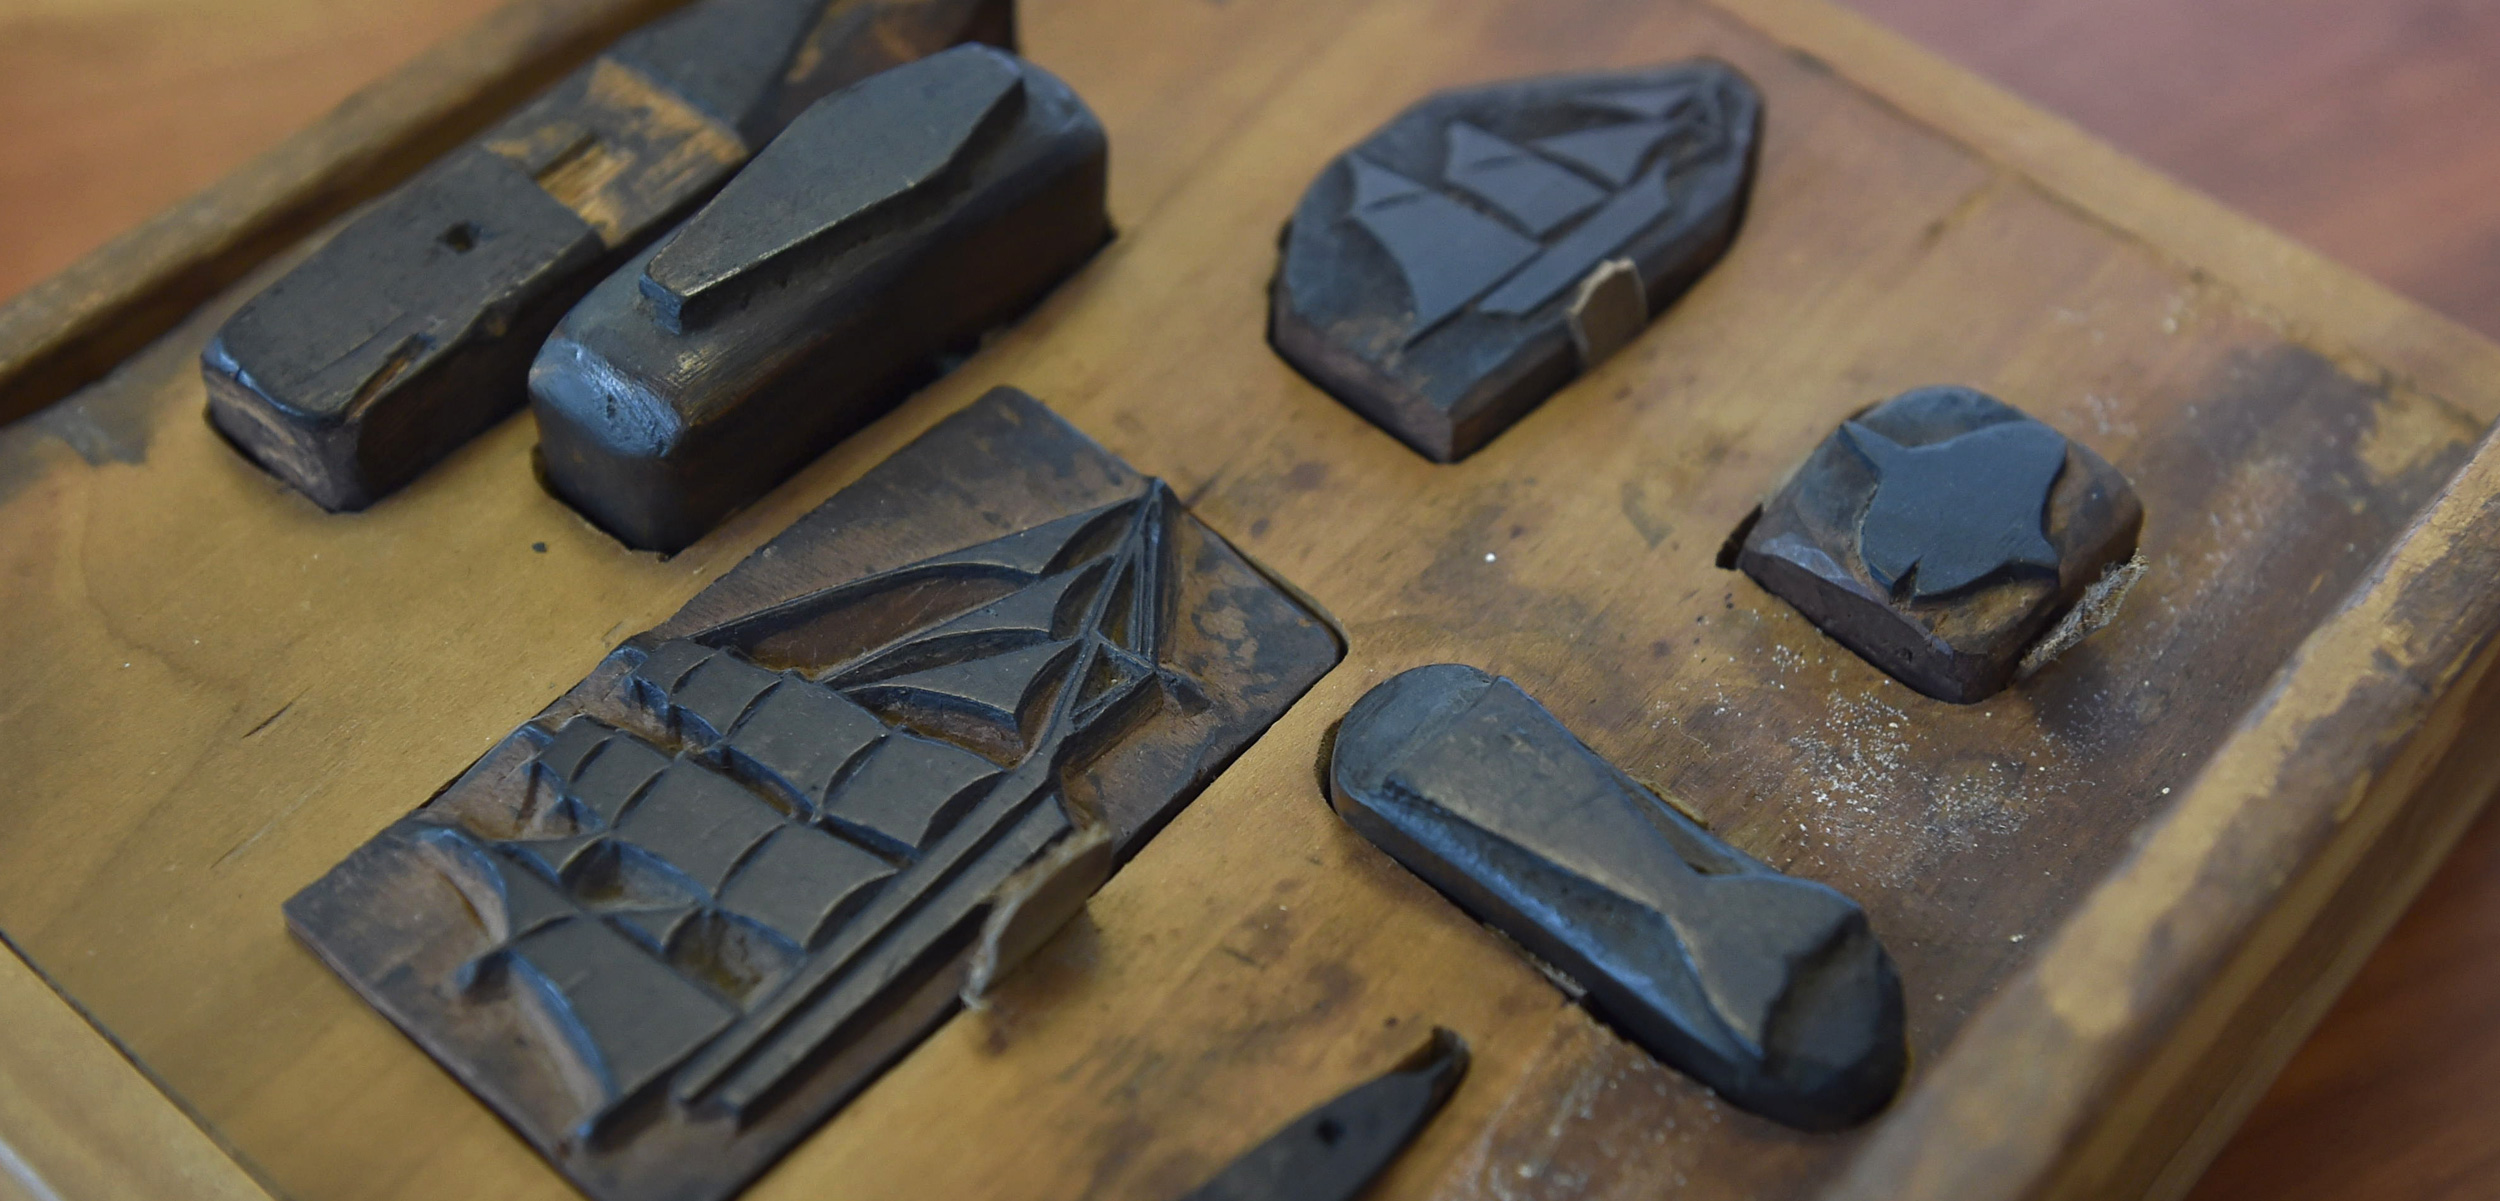 This collection of seven stamps is one of the most elaborate examples of carved stamps used by 19th-century whalers to record details of their voyage. The set includes a whale, a three-masted bark, a schooner, a whale’s flukes, an unidentified cetacean, a sunfish, and a coffin. Photo by Nelson Mare